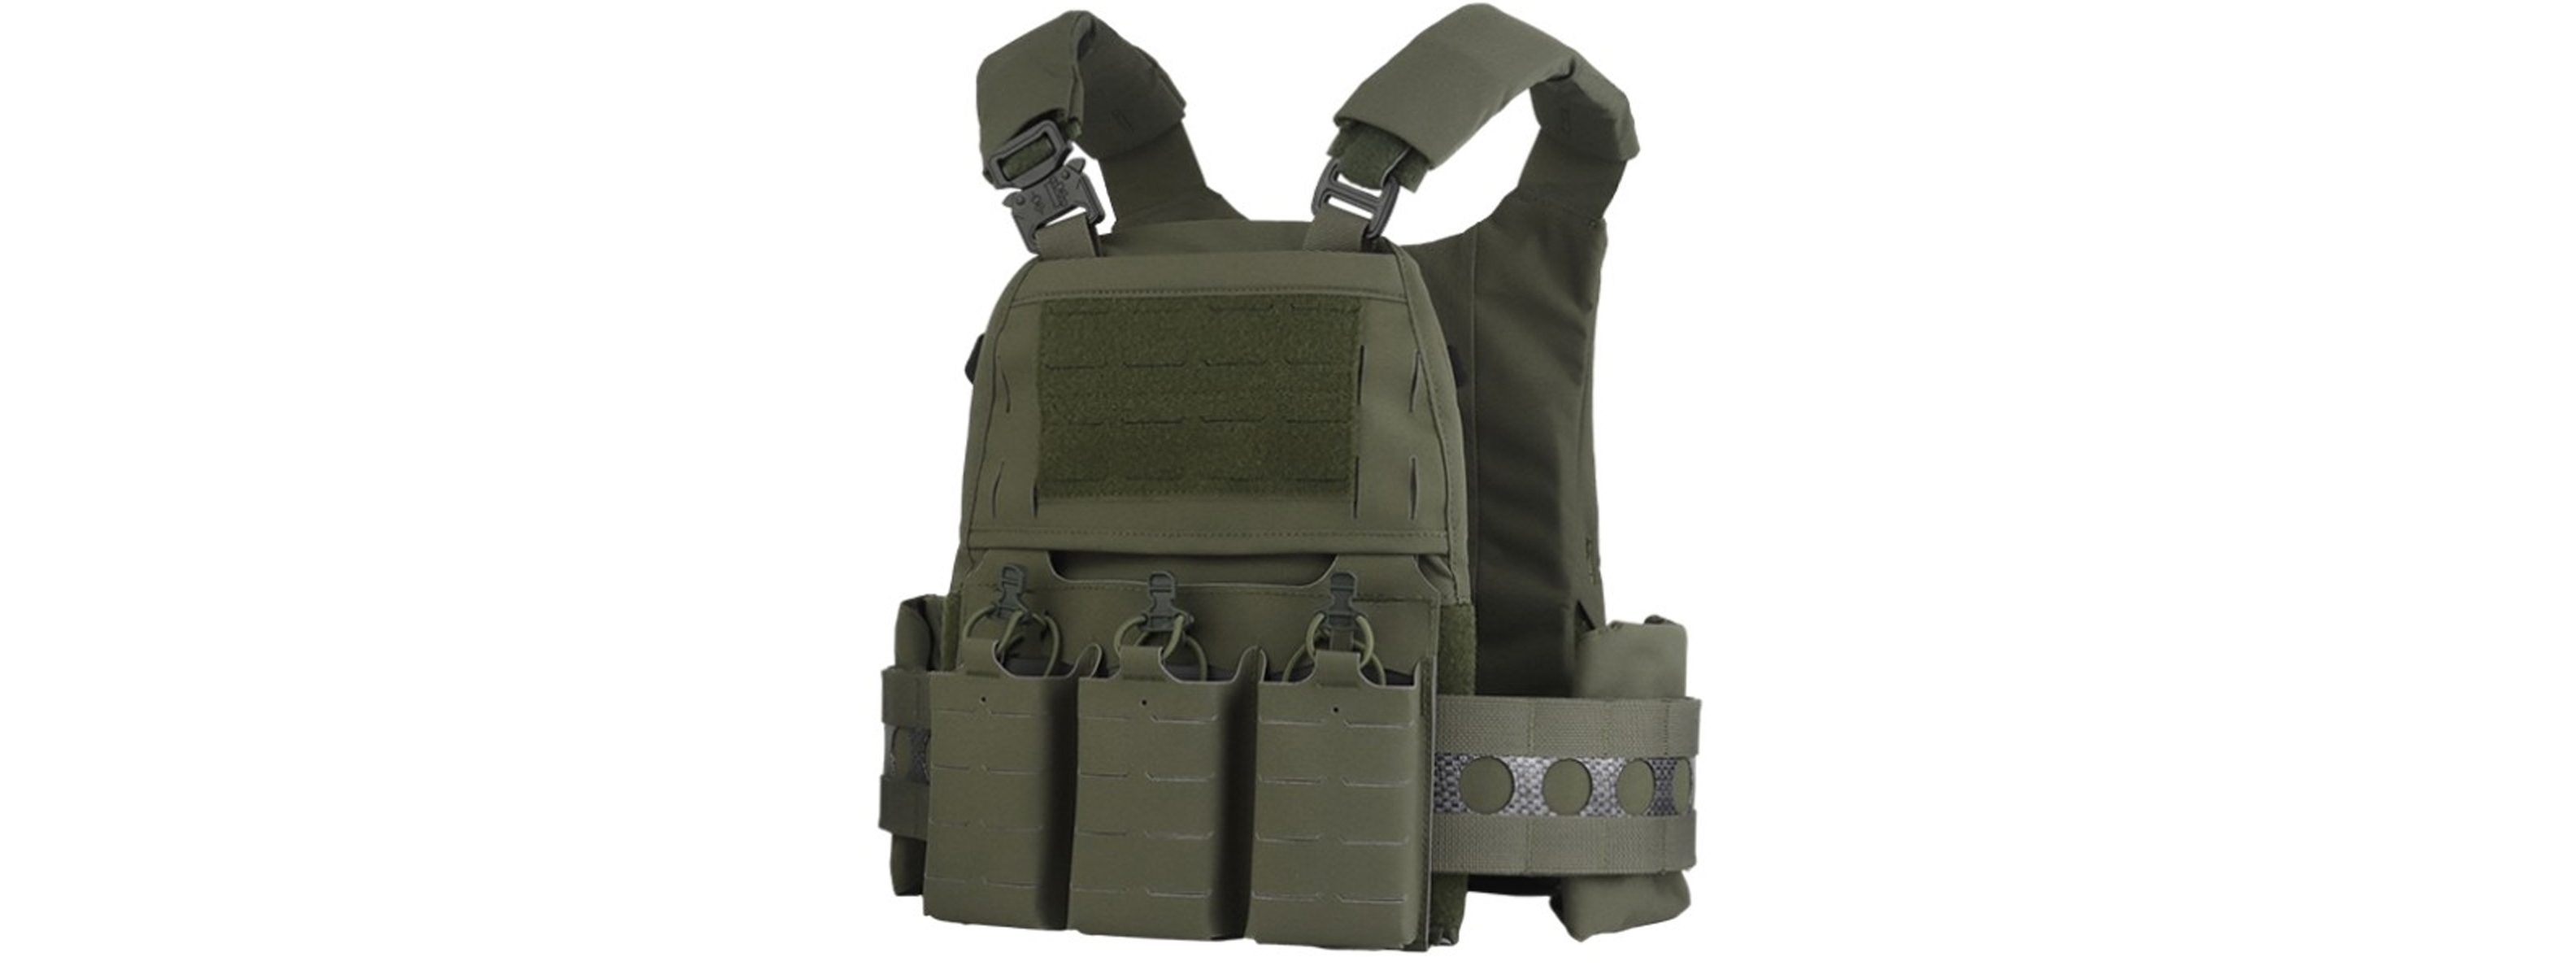 Plate Carrier Tactical Vest w/ Mag Pouches - (OD Green)